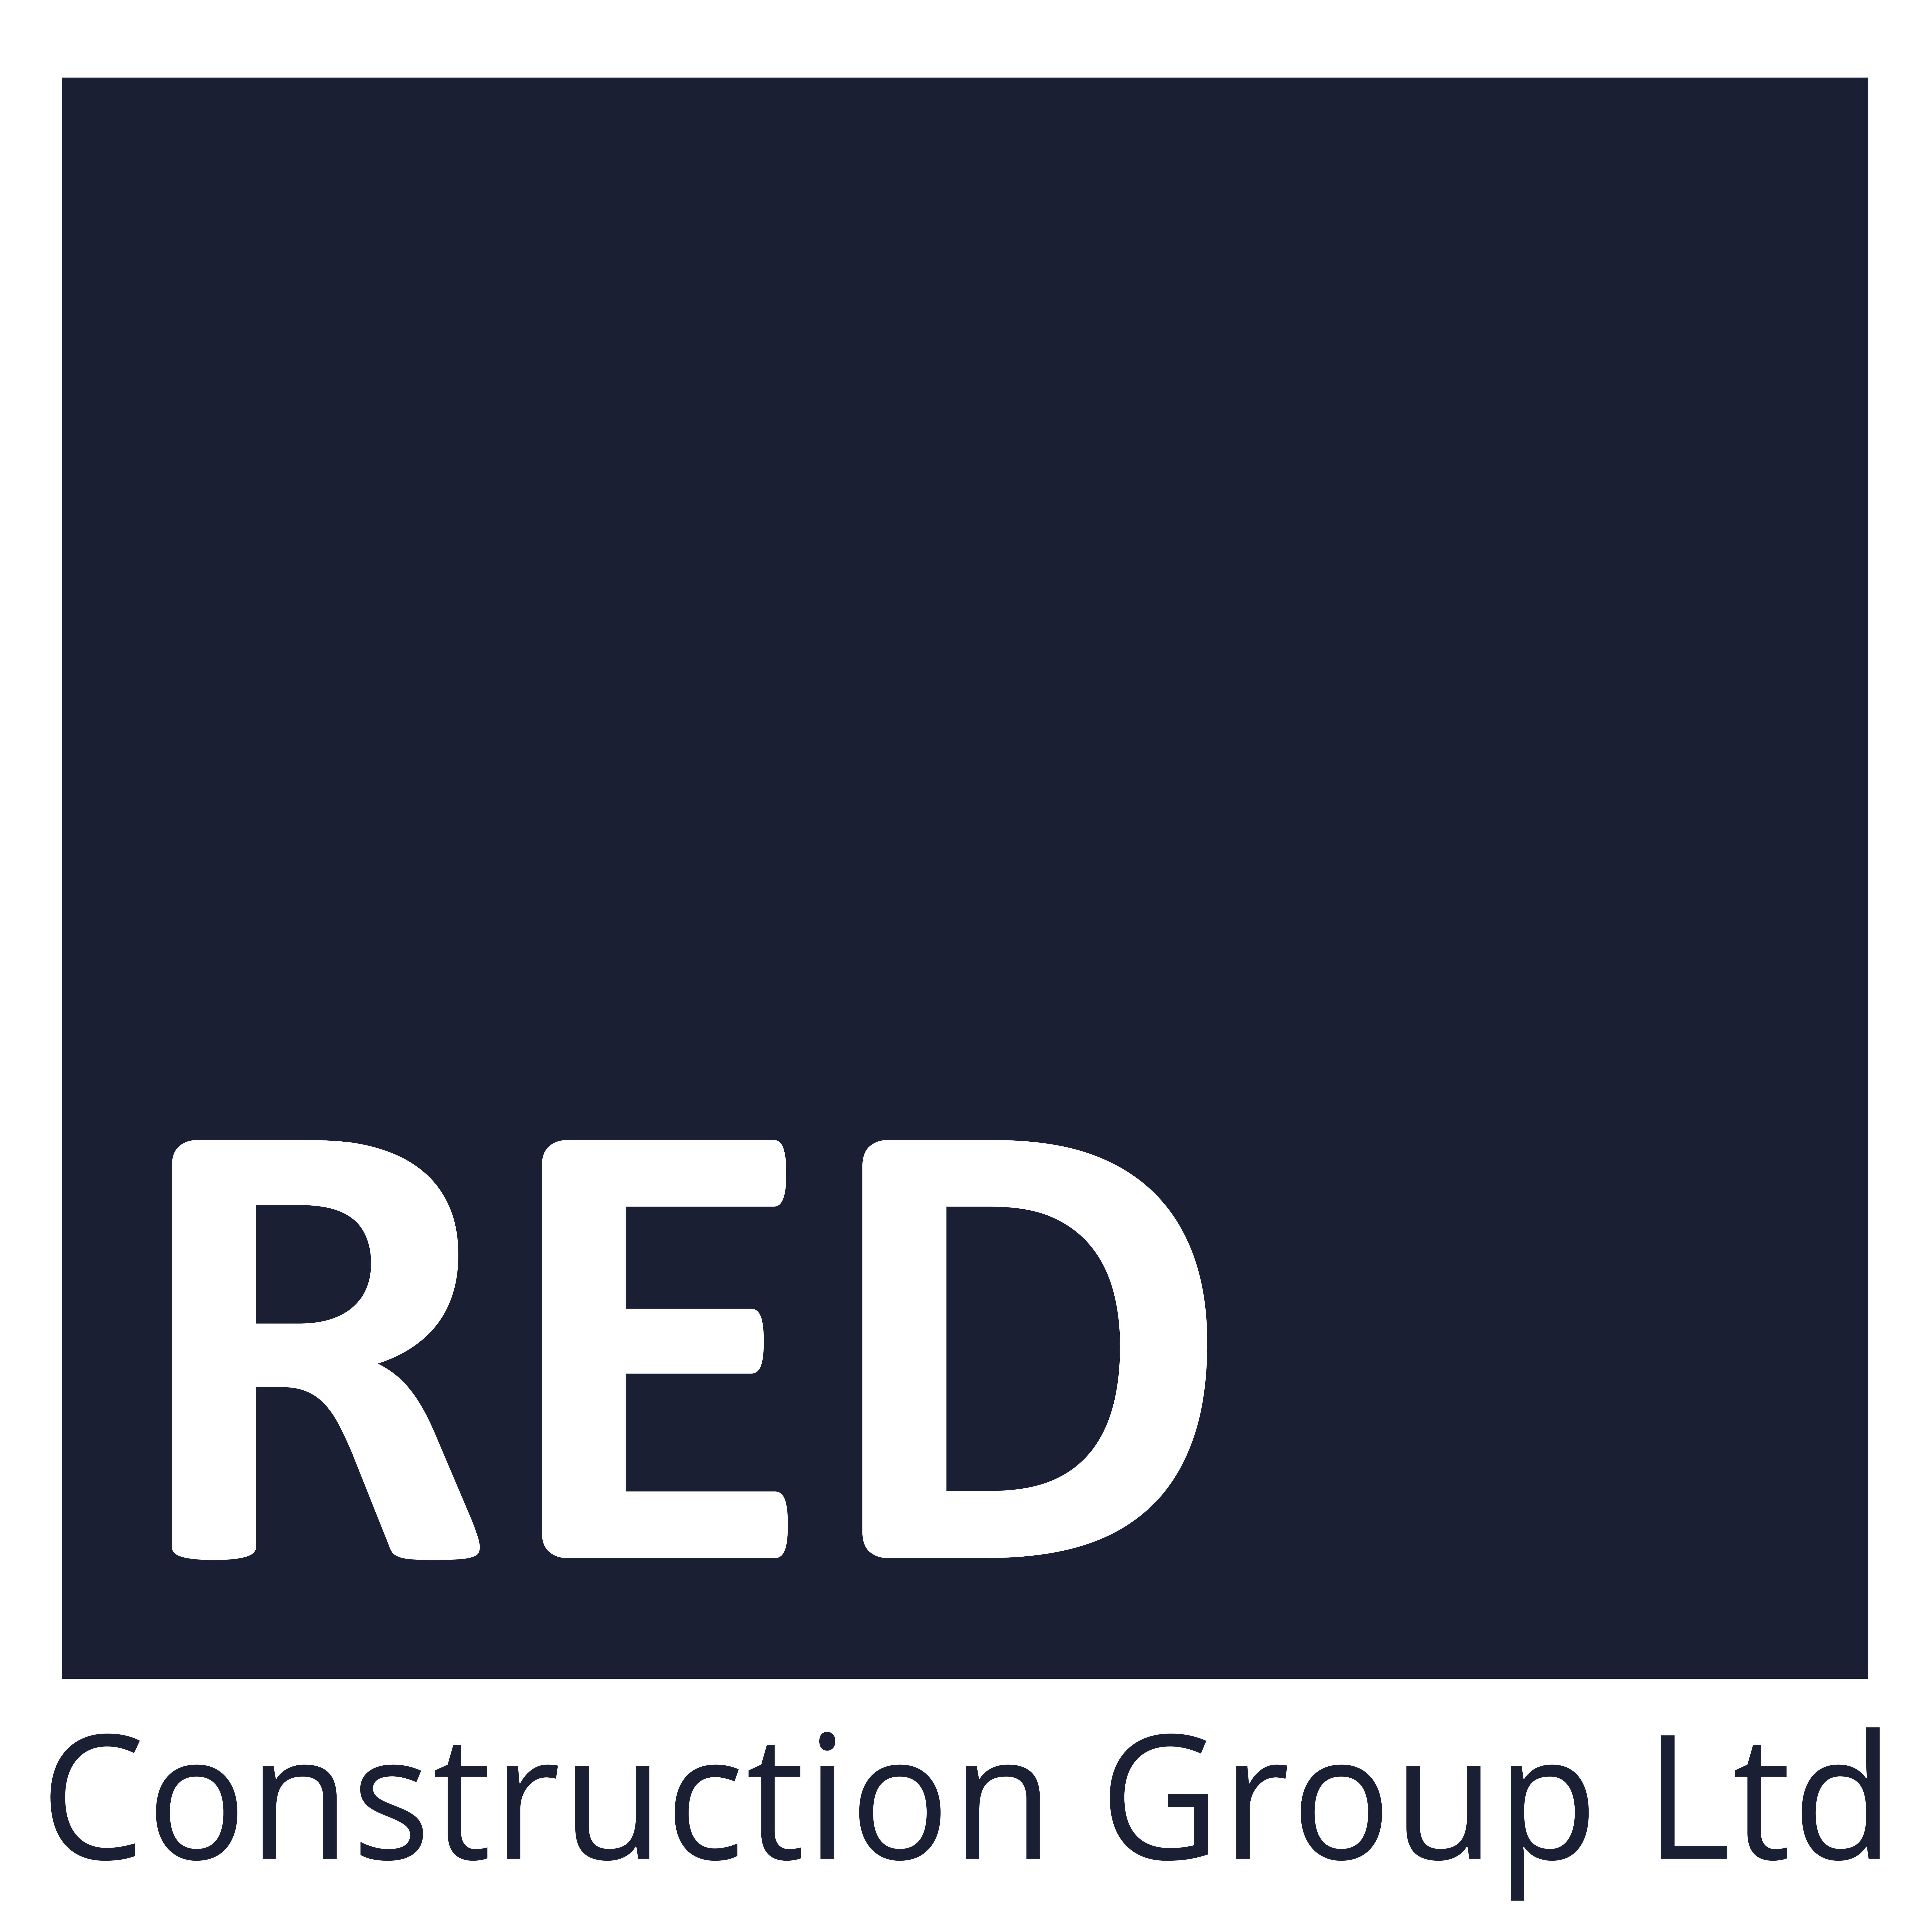 RED Construction - Site Inspection Rev 1